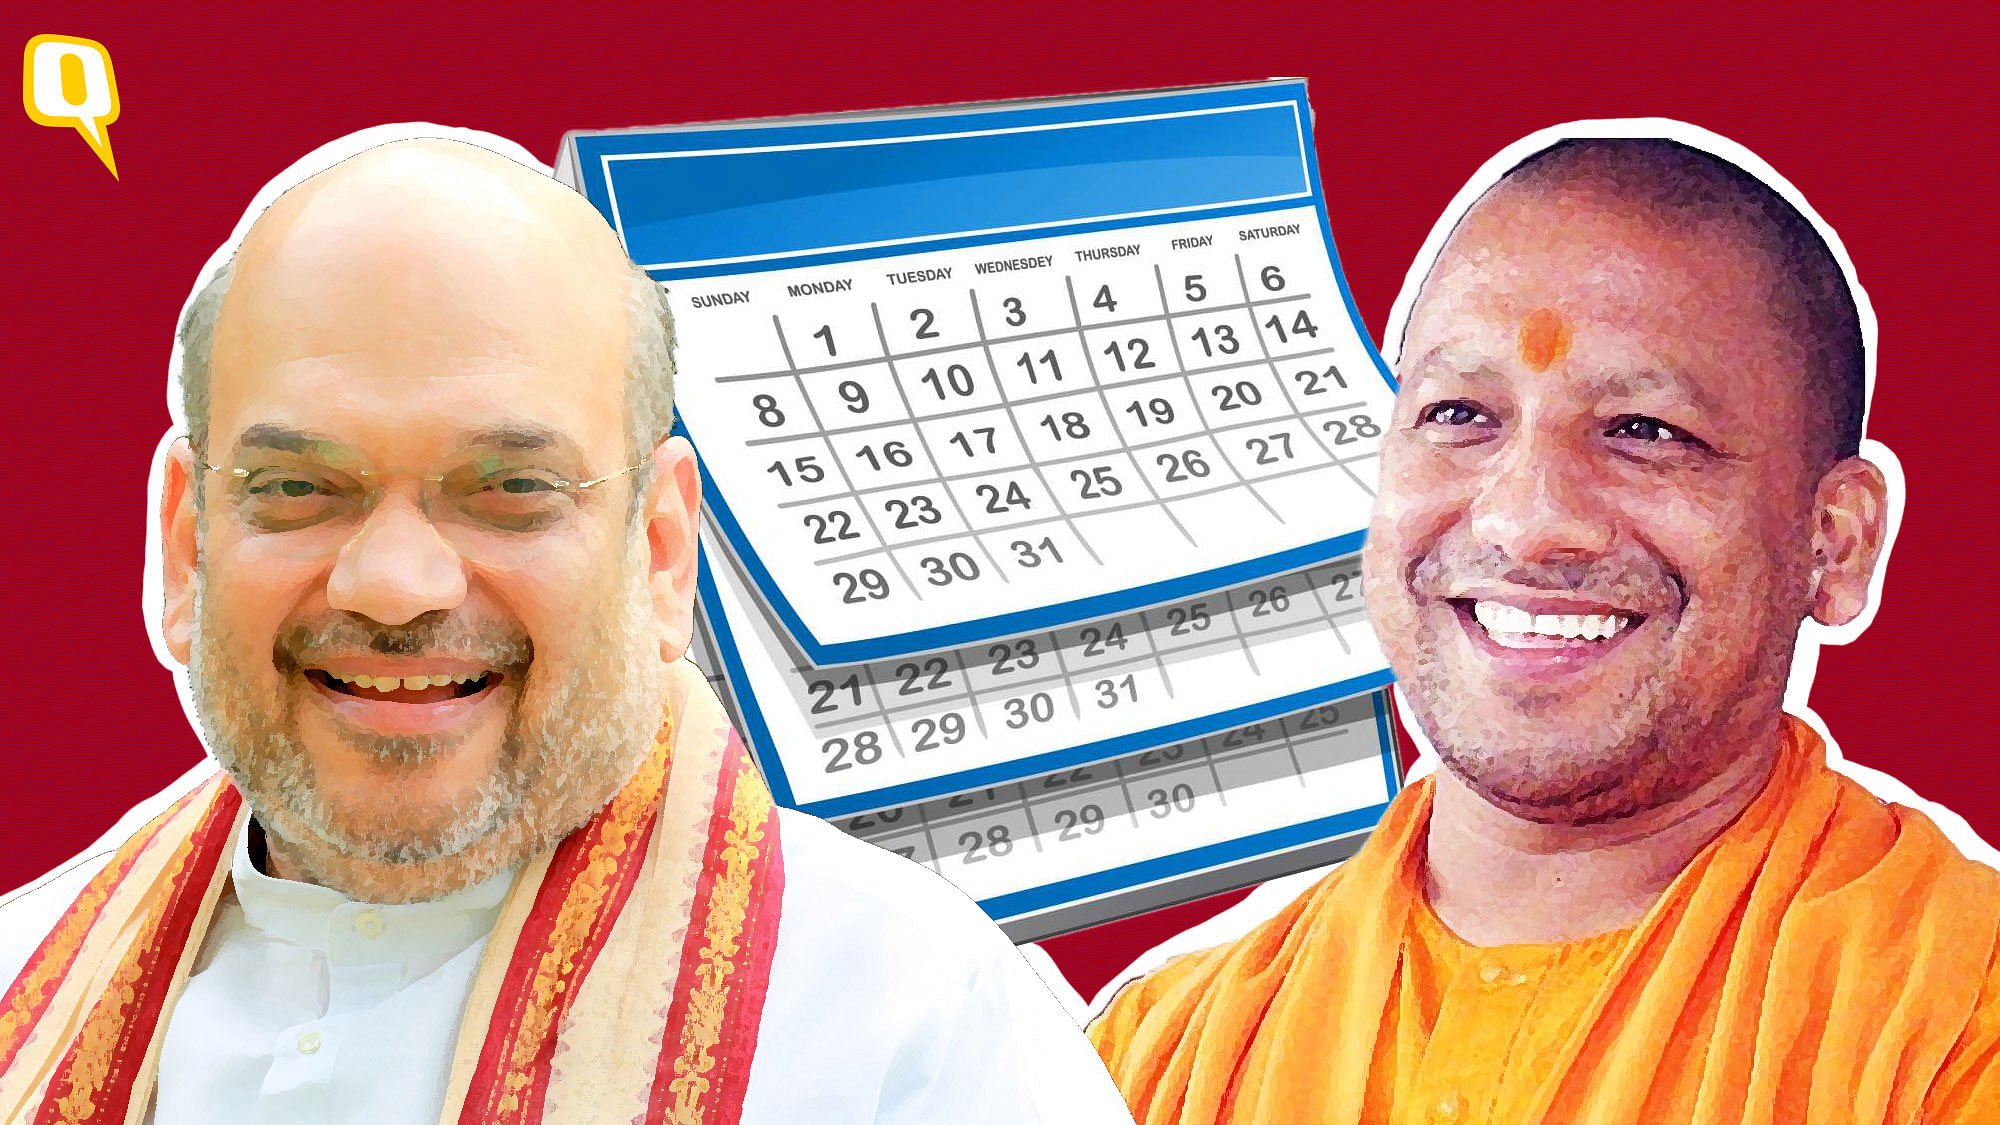 The calendar, said to be a part of the Madhya Pradesh Police’s anti-drug campaign, features pictures of Uttar Pradesh  Chief Minister Yogi Adityanath and BJP president Amit Shah, among other BJP and RSS leaders.